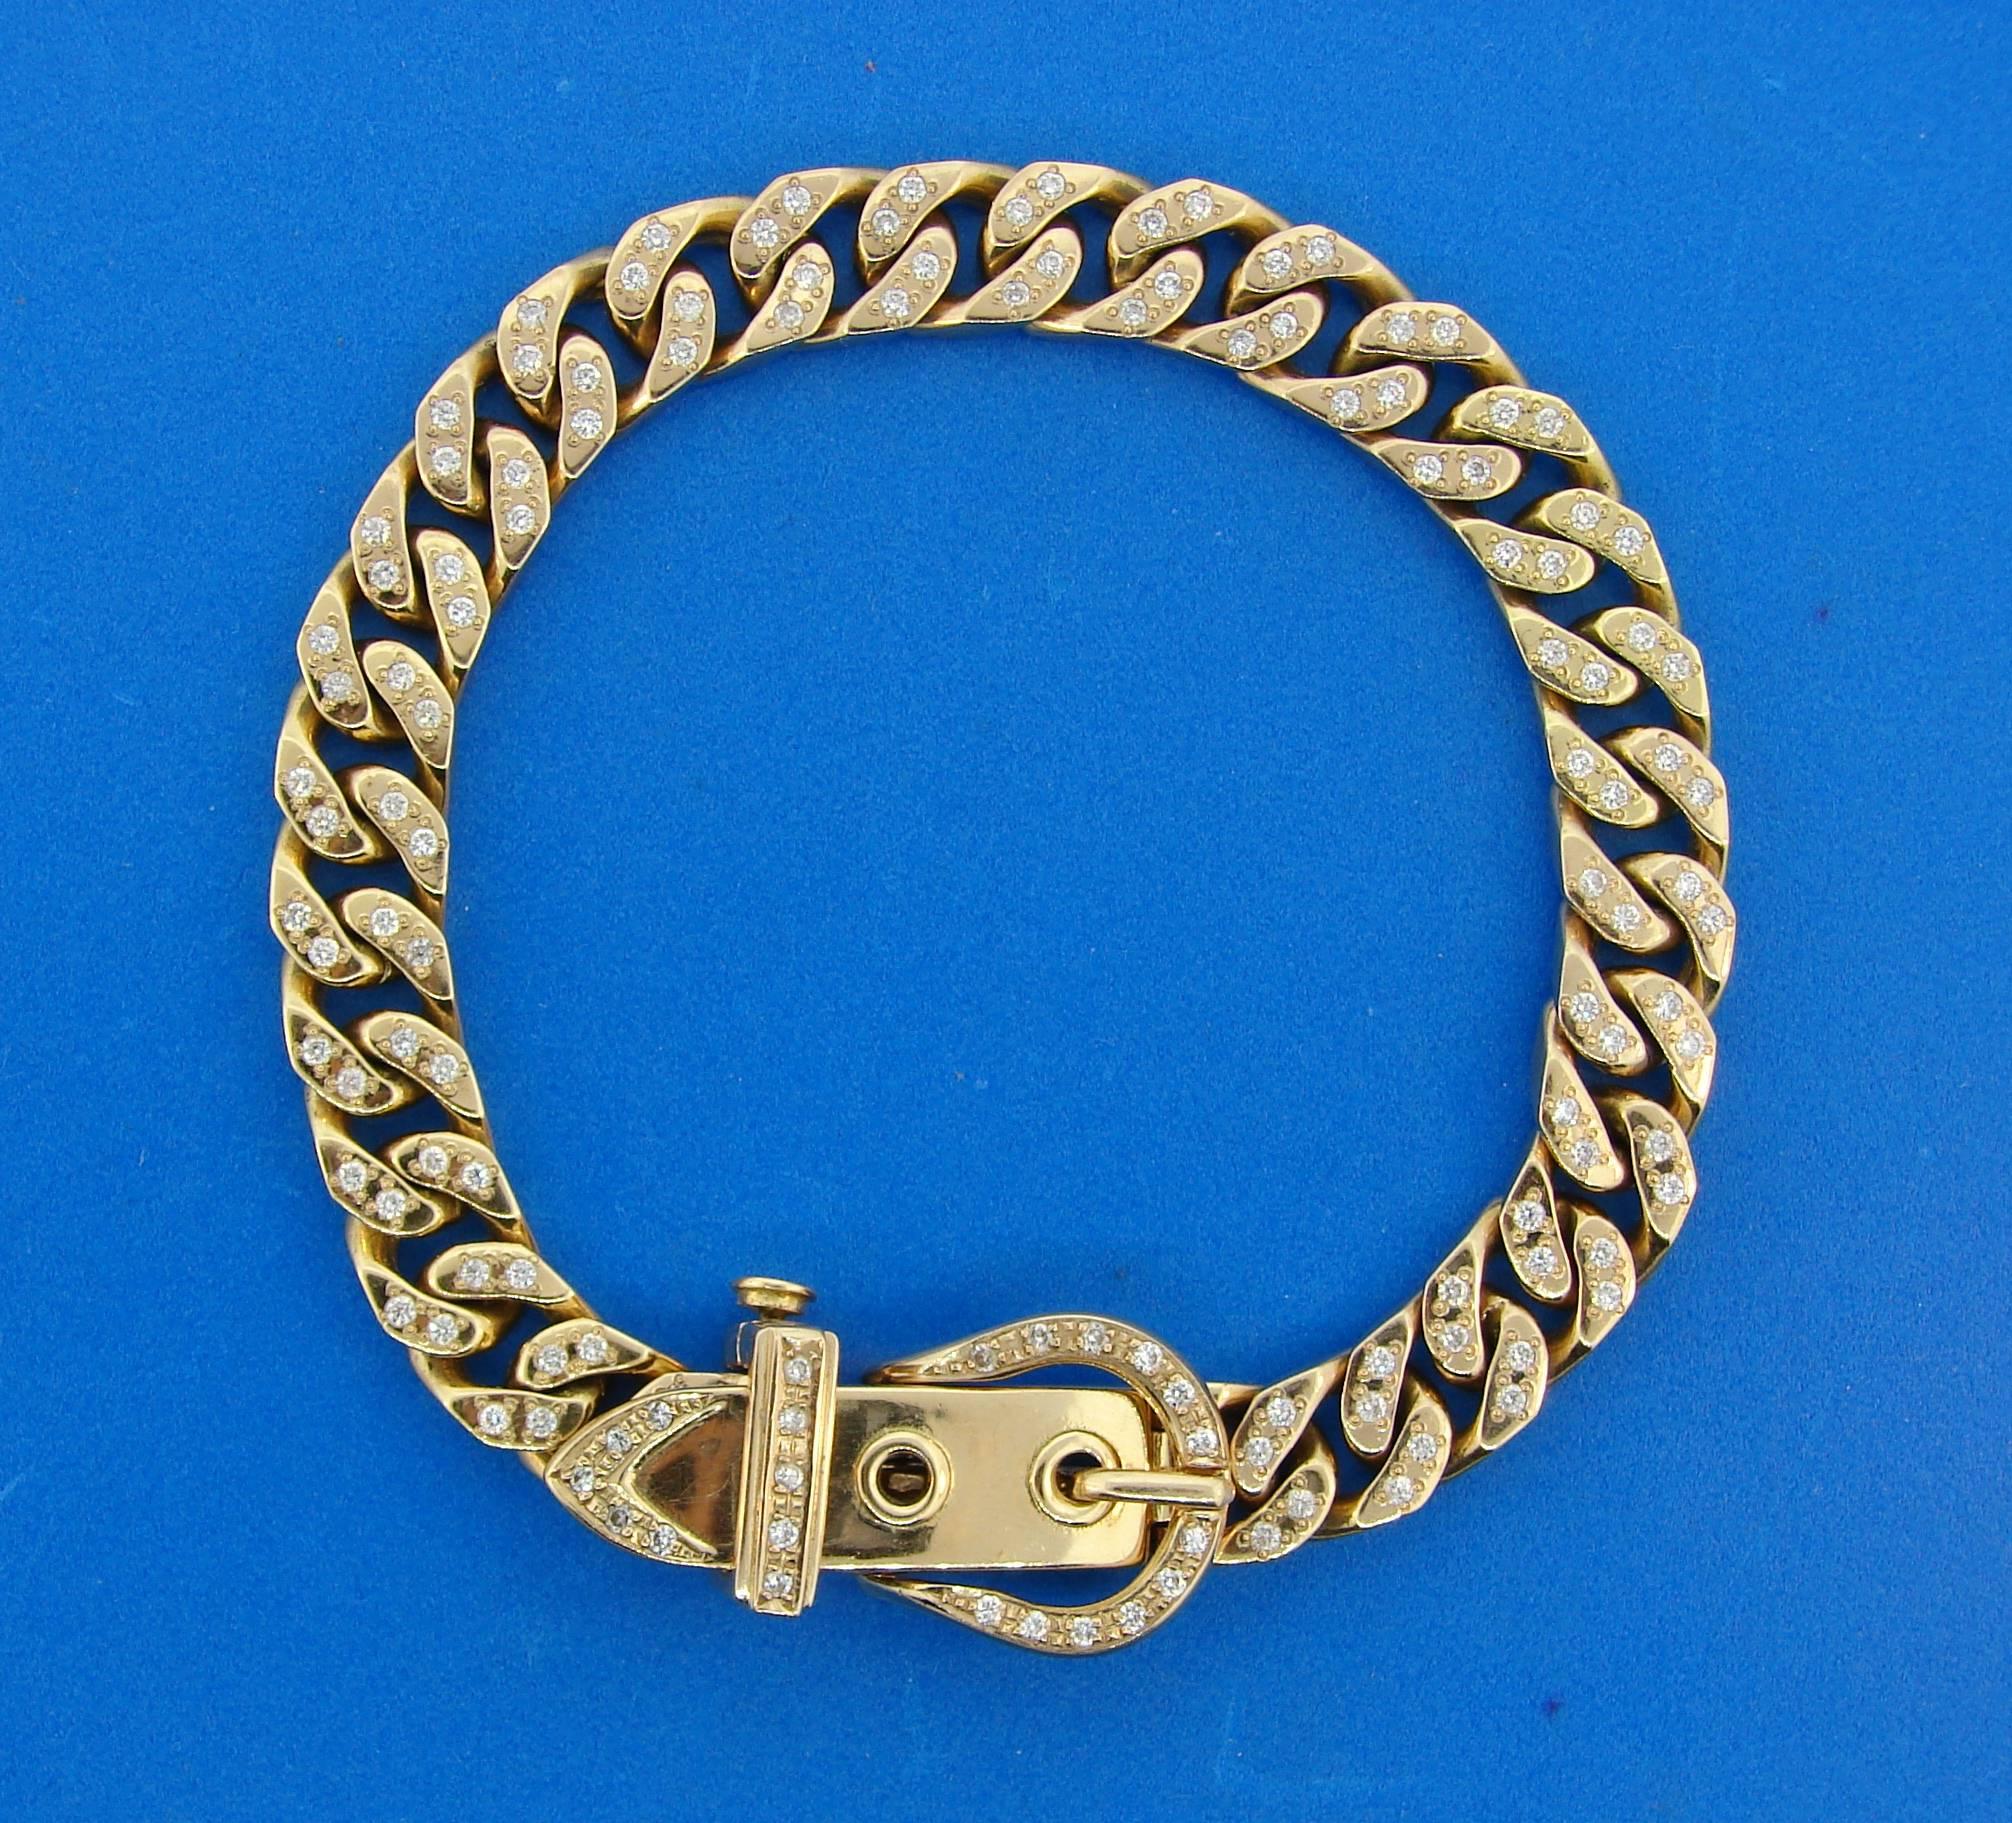 Chic and timeless buckle bracelet created by Hermes in France in the 1970's. Wearable and popular, the bracelet is a great addition to your jewelry collection. 
It is made of 18 karat yellow gold and set with round brilliant cut diamonds (F-G color,